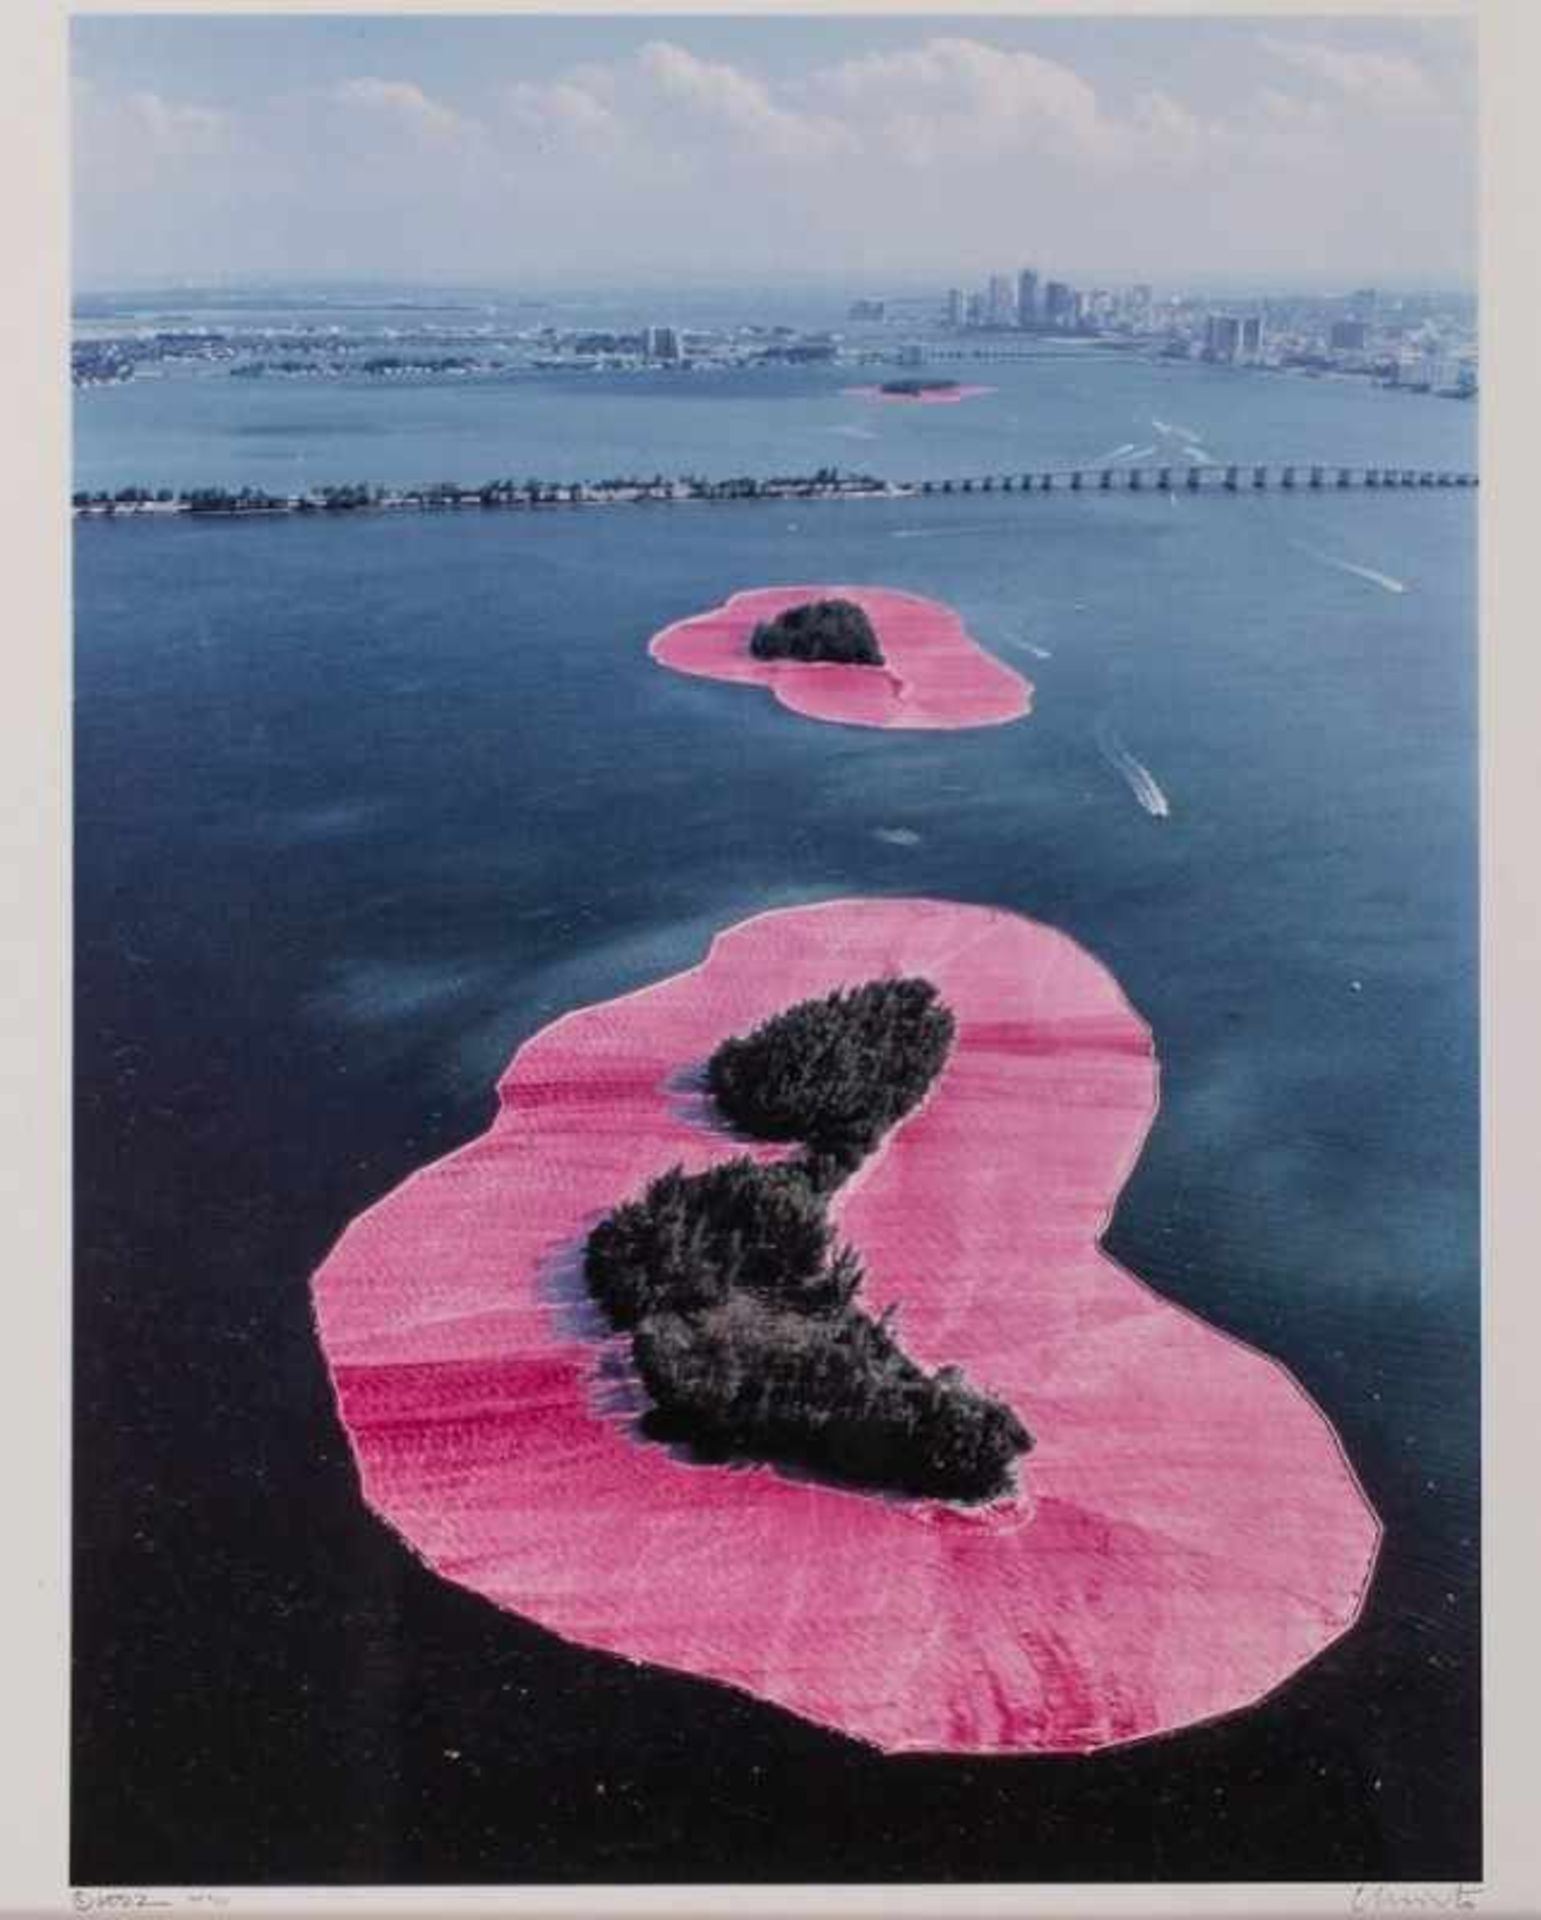 Serie von 4 PhotographienChristo/ Wolfgang Volz "Surrounded Islands, Biscayne Bay, Greater Miami, - Image 5 of 5